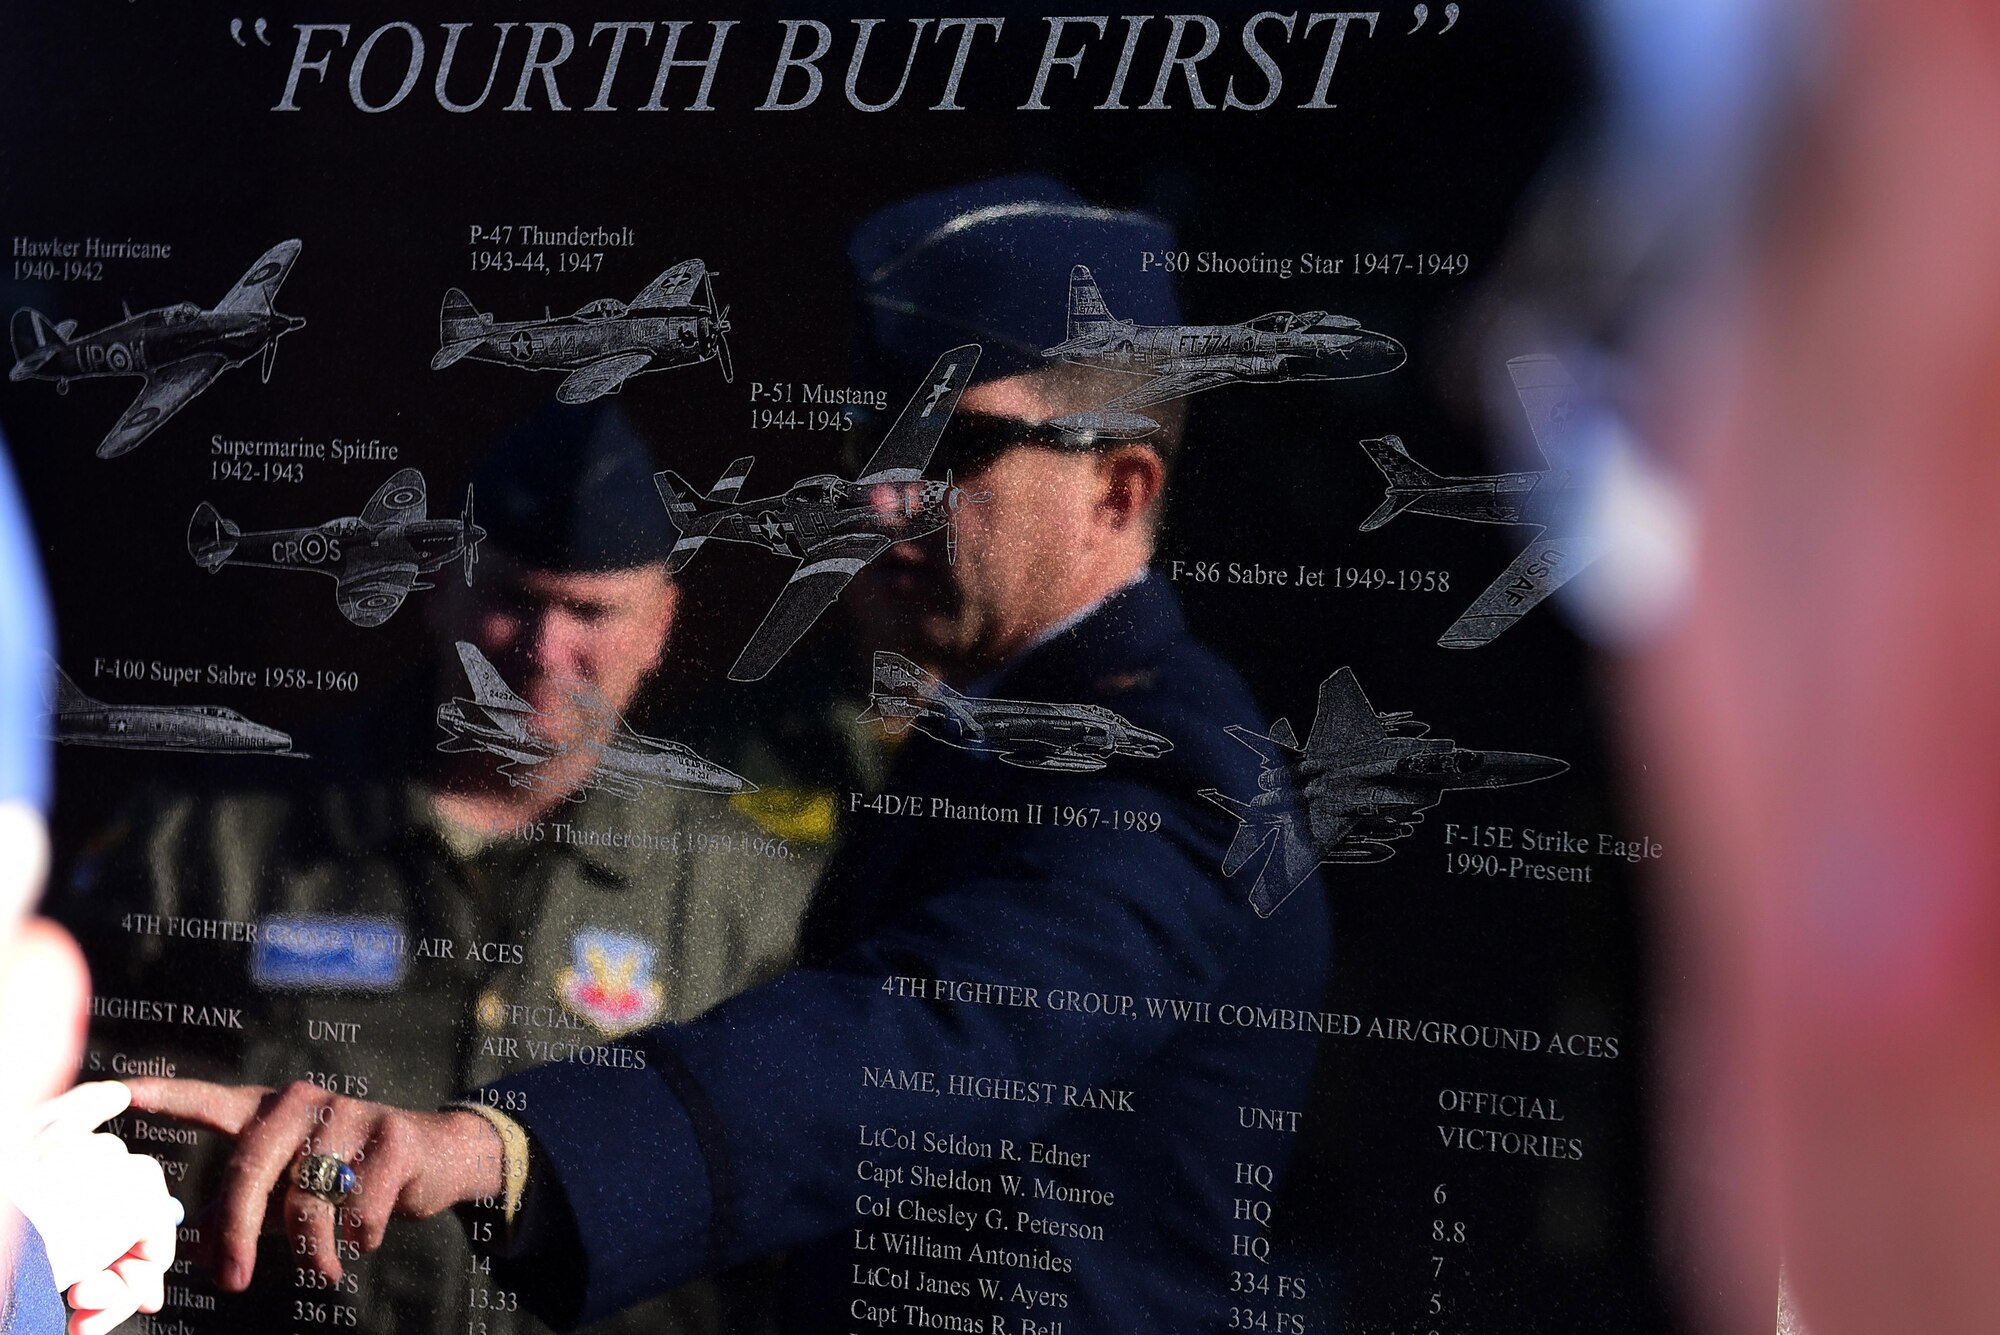 Col. Christopher Sage, 4th Fighter Wing commander, observe the new honor stone unveiled Nov. 11, 2017, at Seymour Johnson Air Force Base, North Carolina. The monument was placed in front of 4th Mission Support Group building and represents all of the Airmen from the 4th Fighter Wing who have either died in combat or became aerial aces. (U.S. Air Force photo by Airman 1st Class Kenneth Boyton)